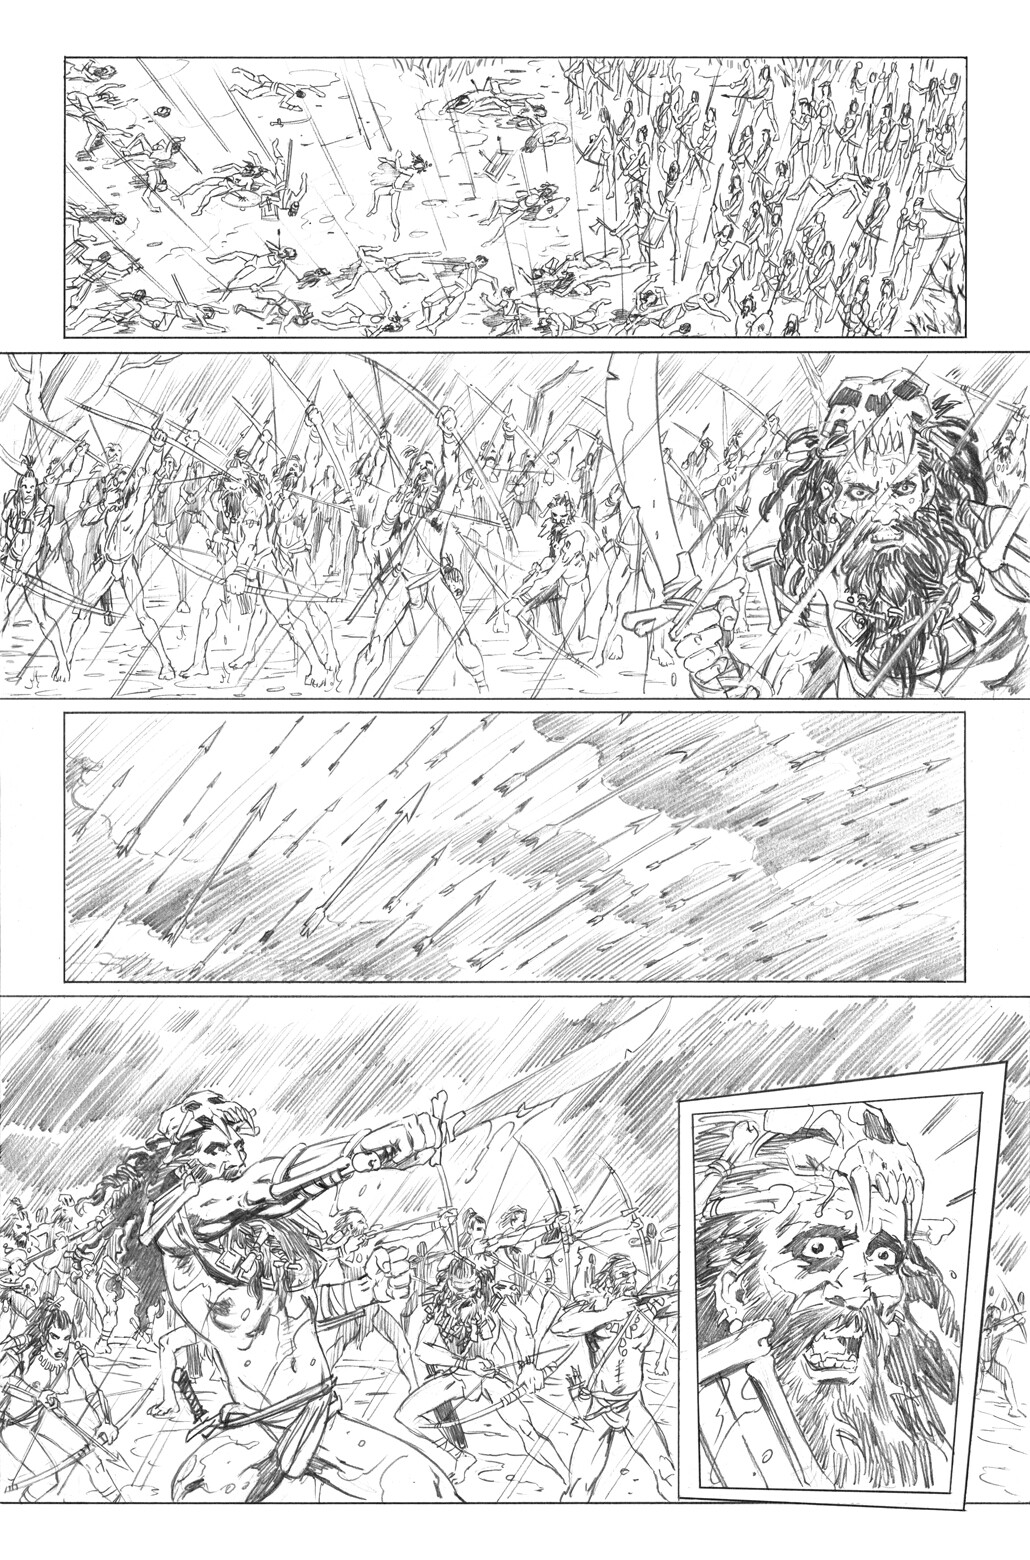 Scions of the Cursed King #2
Page 2 pencils.